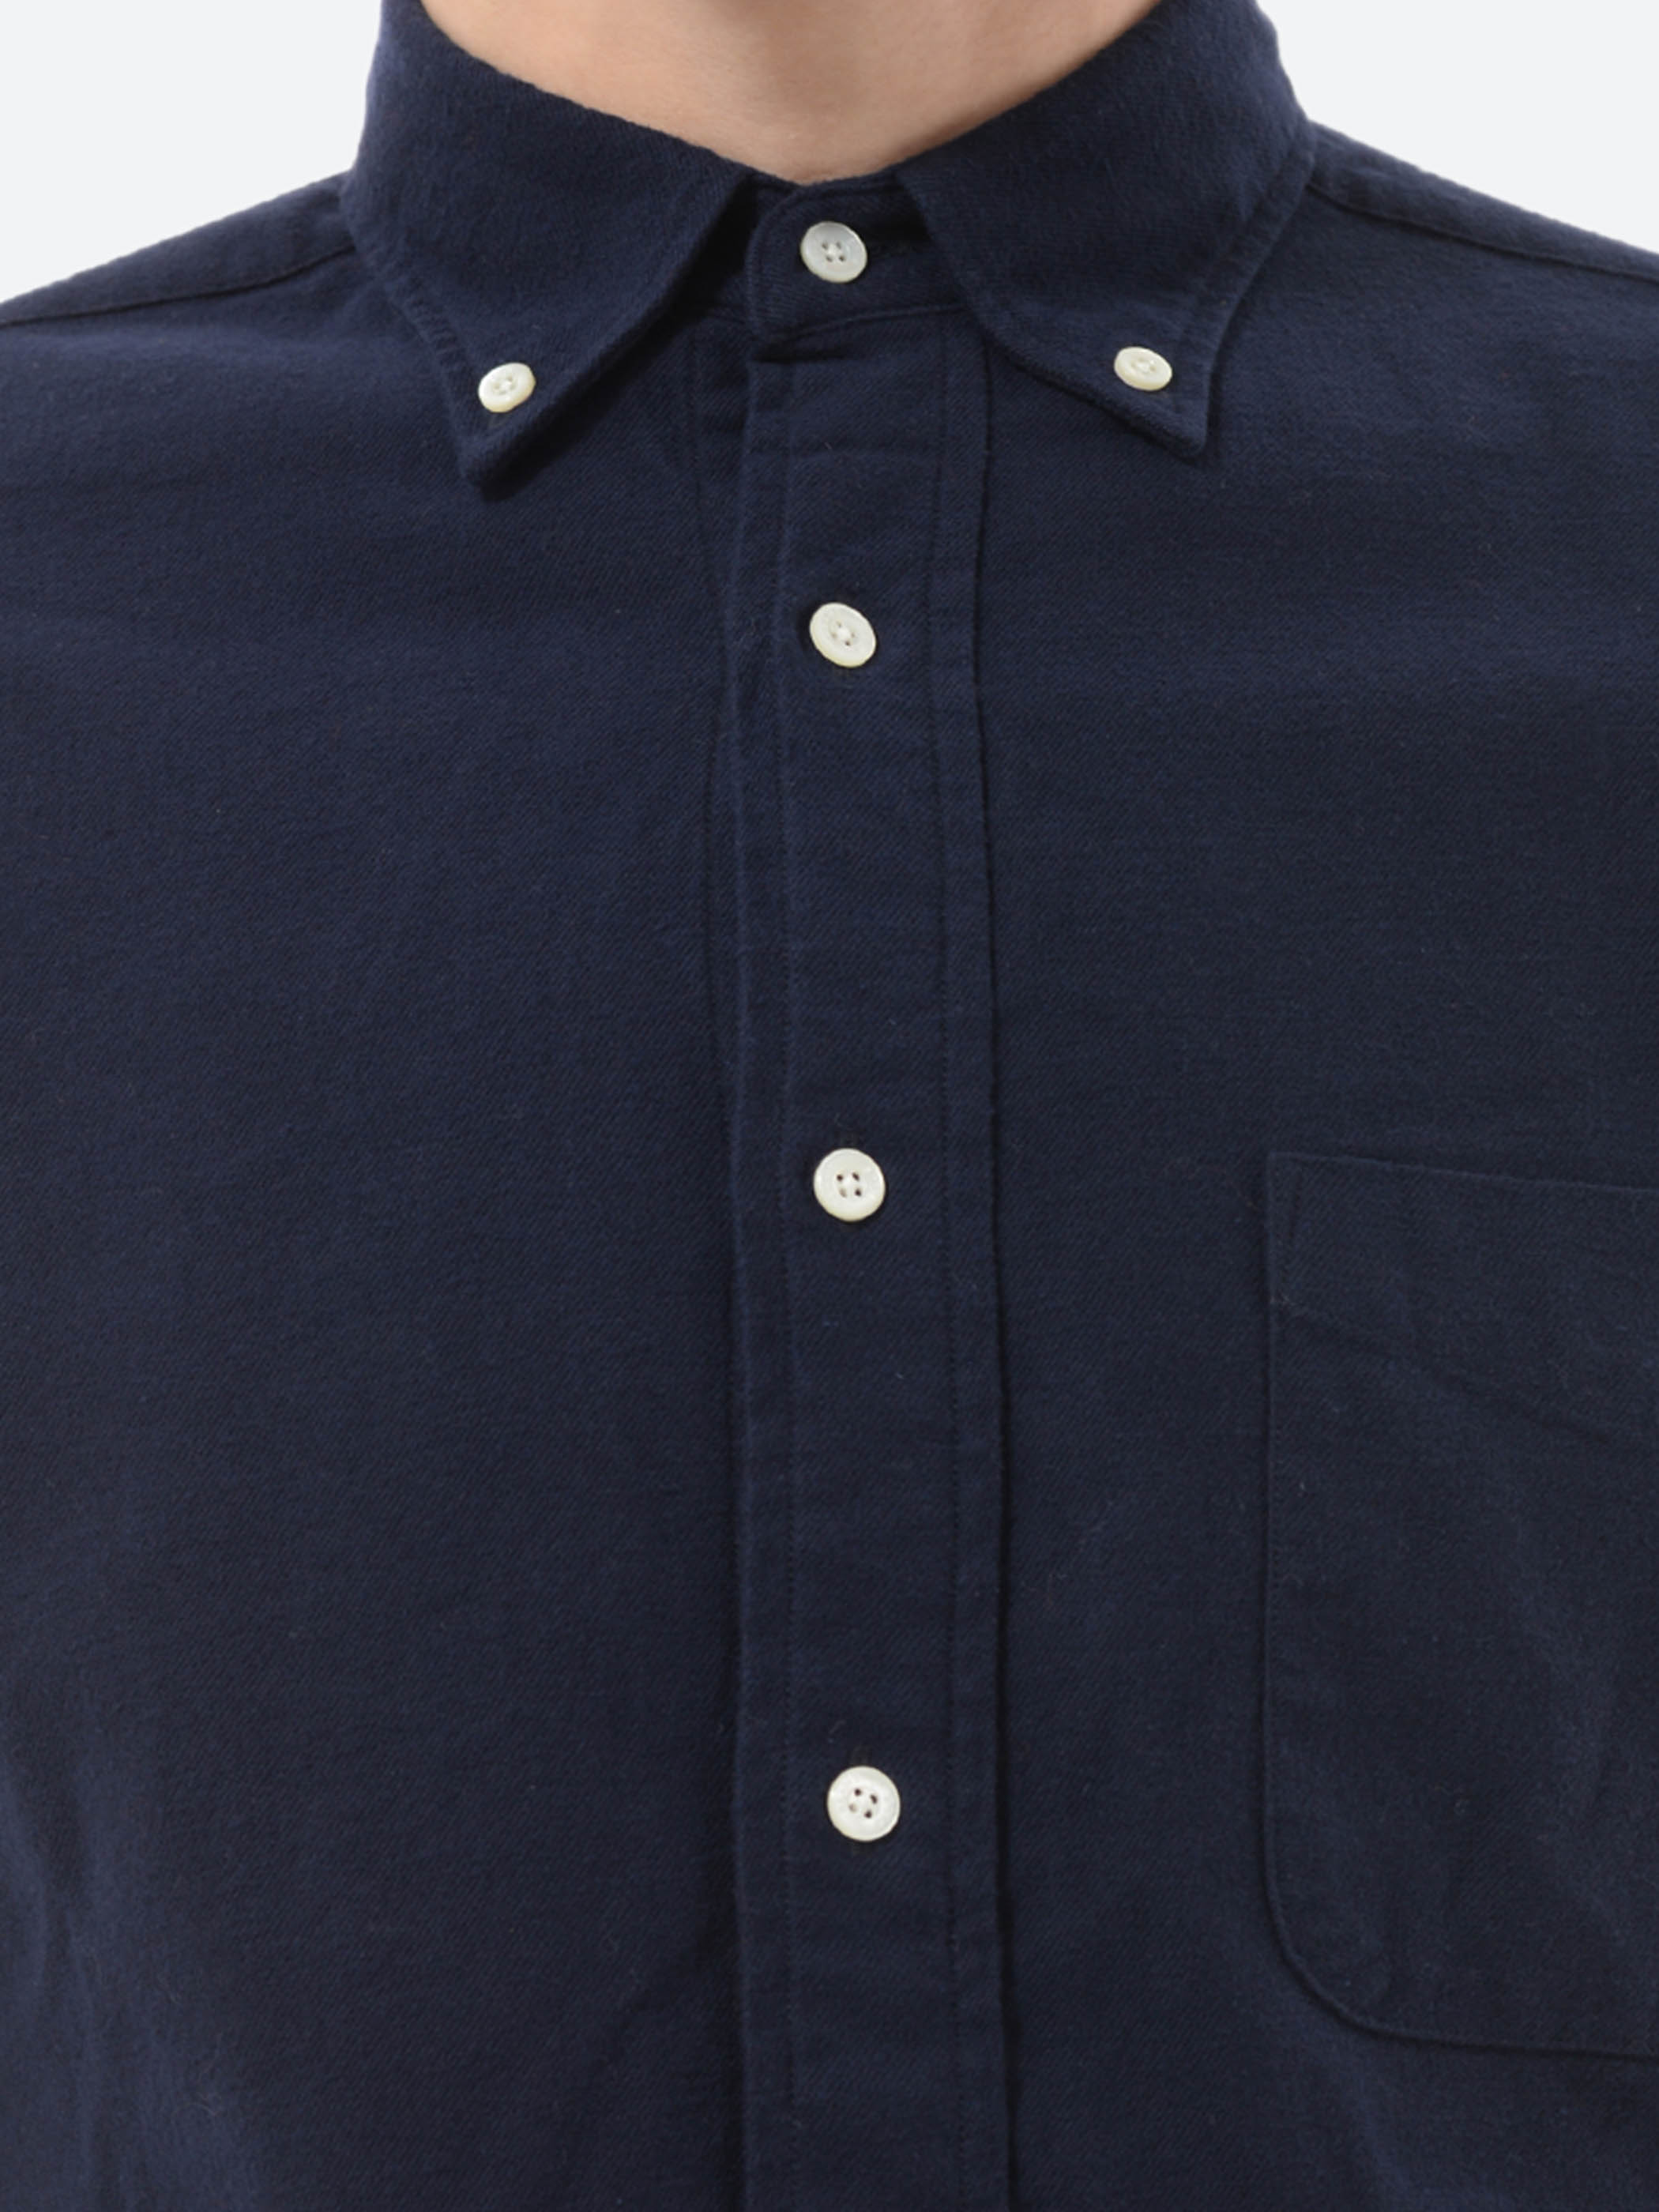 Flannel Solid Button Down Shirt